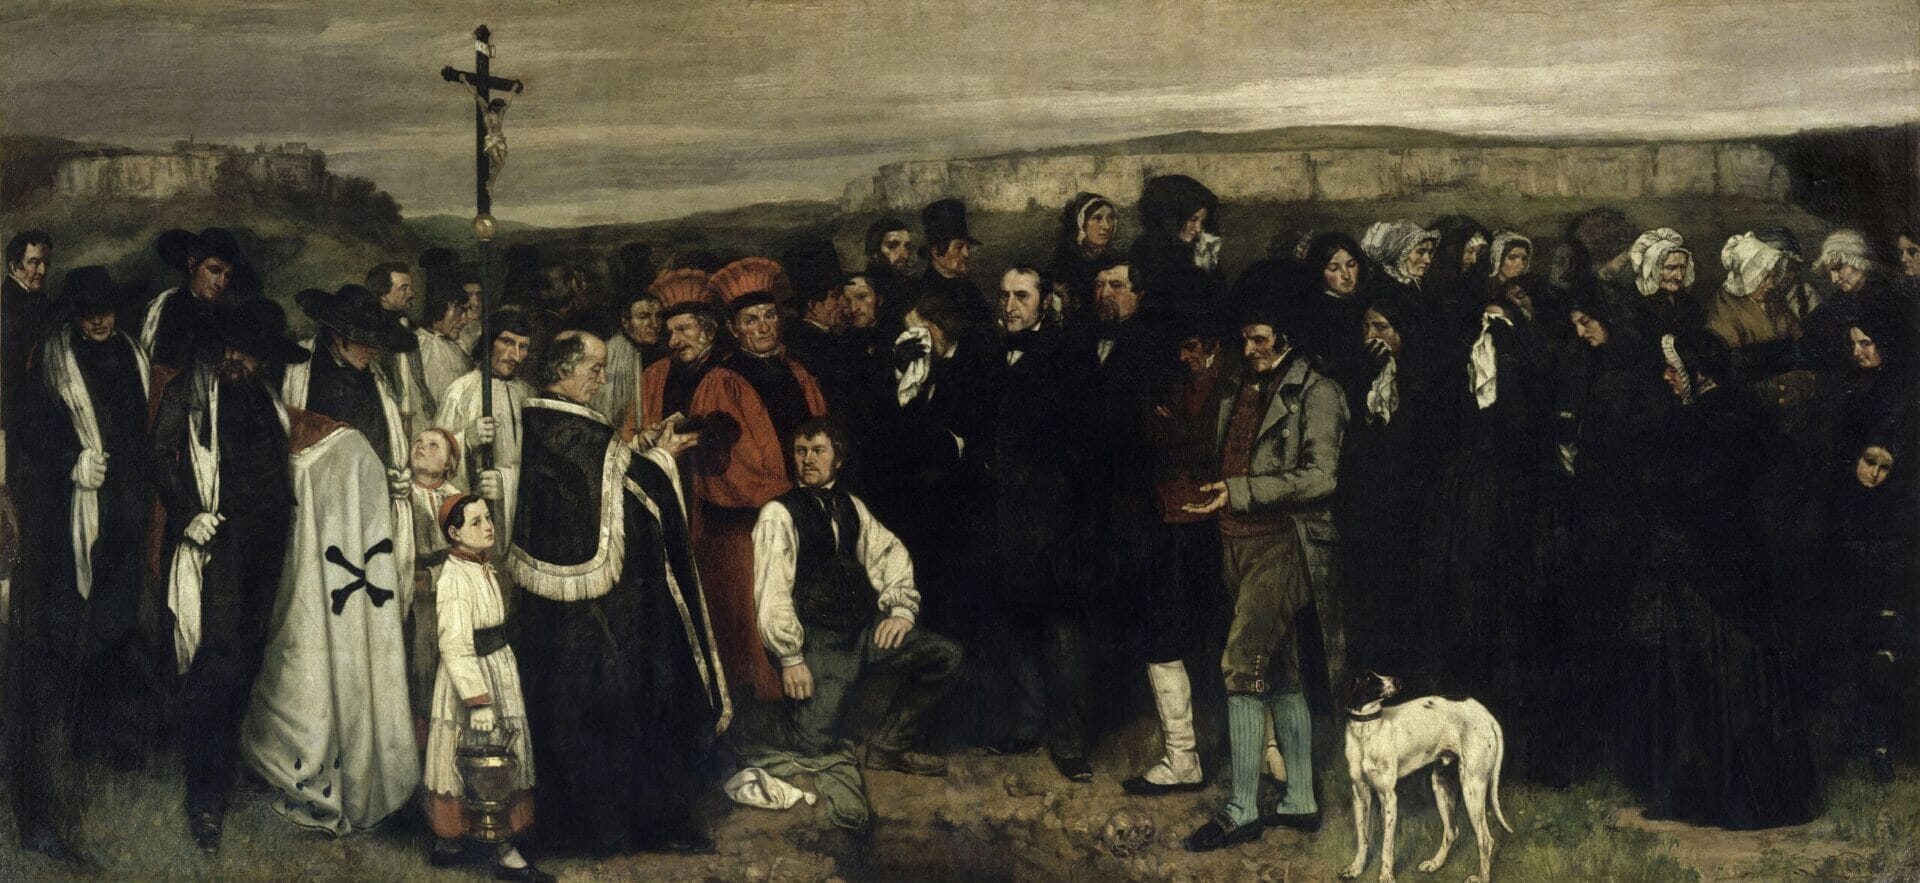  A Funeral At Ornans, Gustave Courbet, 1849-50. Wikipedia Public domain